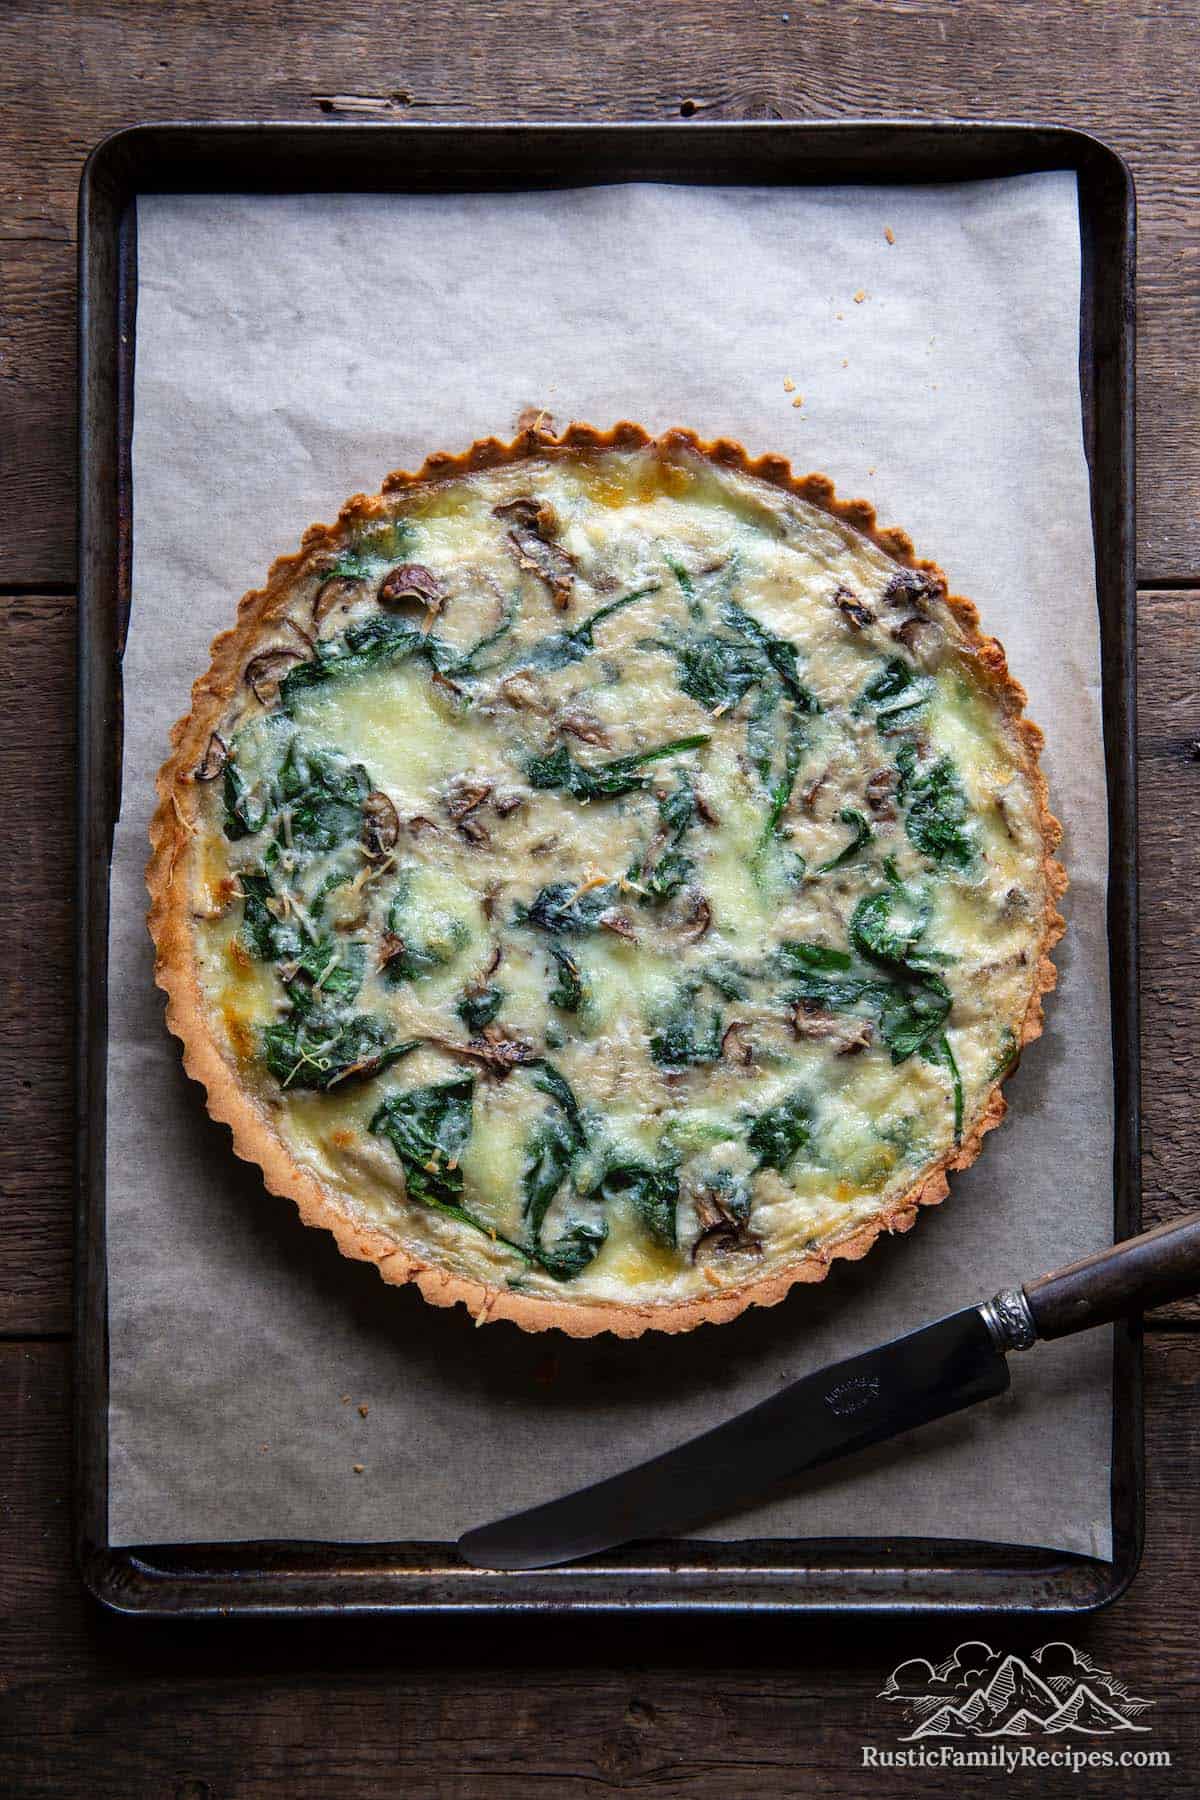 A spinach mushroom quiche on a baking tray lined with parchment paper